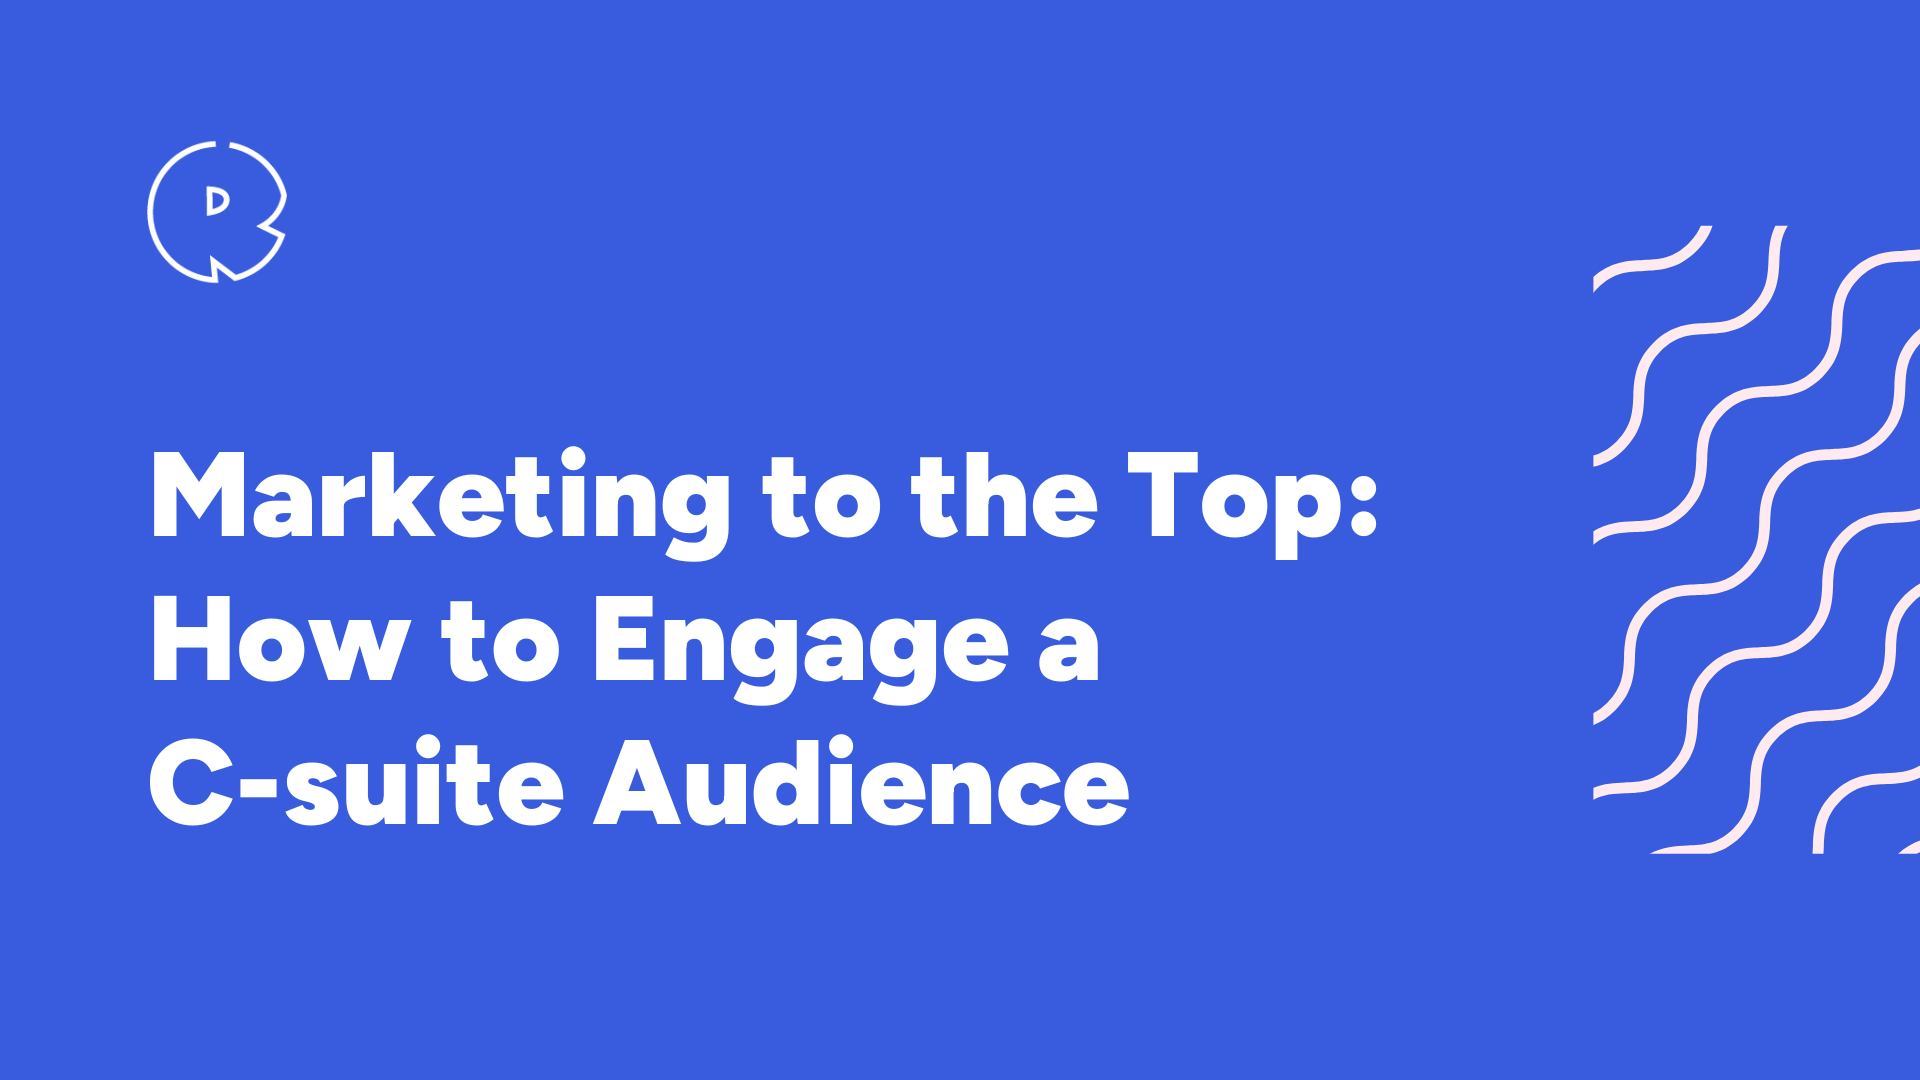  How to Engage a C-suite Audience